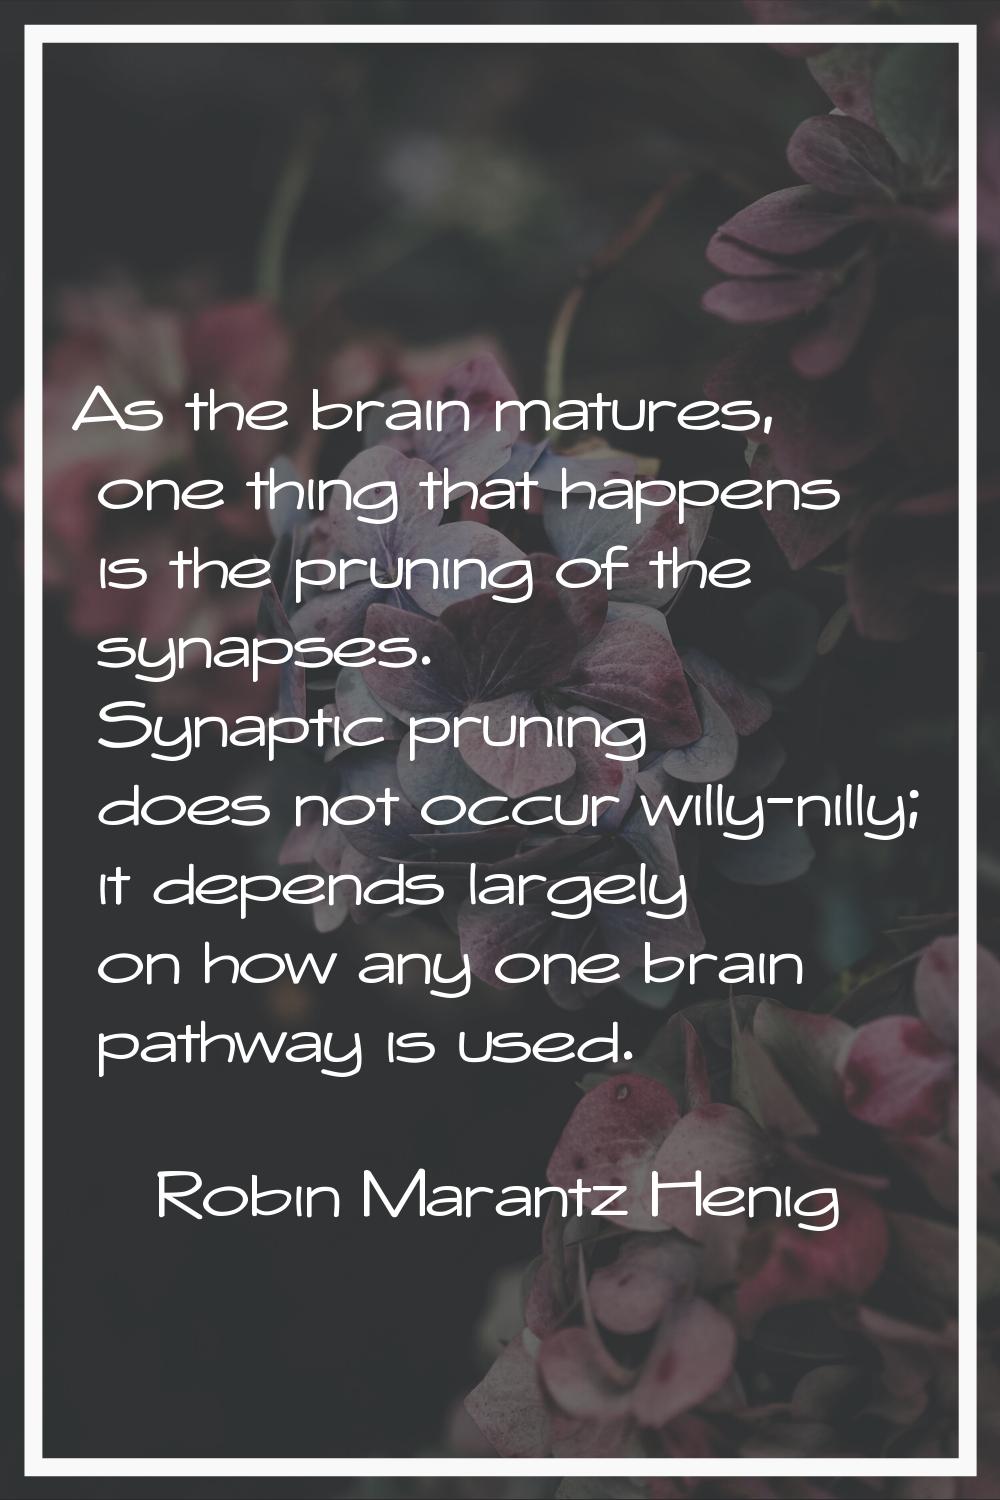 As the brain matures, one thing that happens is the pruning of the synapses. Synaptic pruning does 